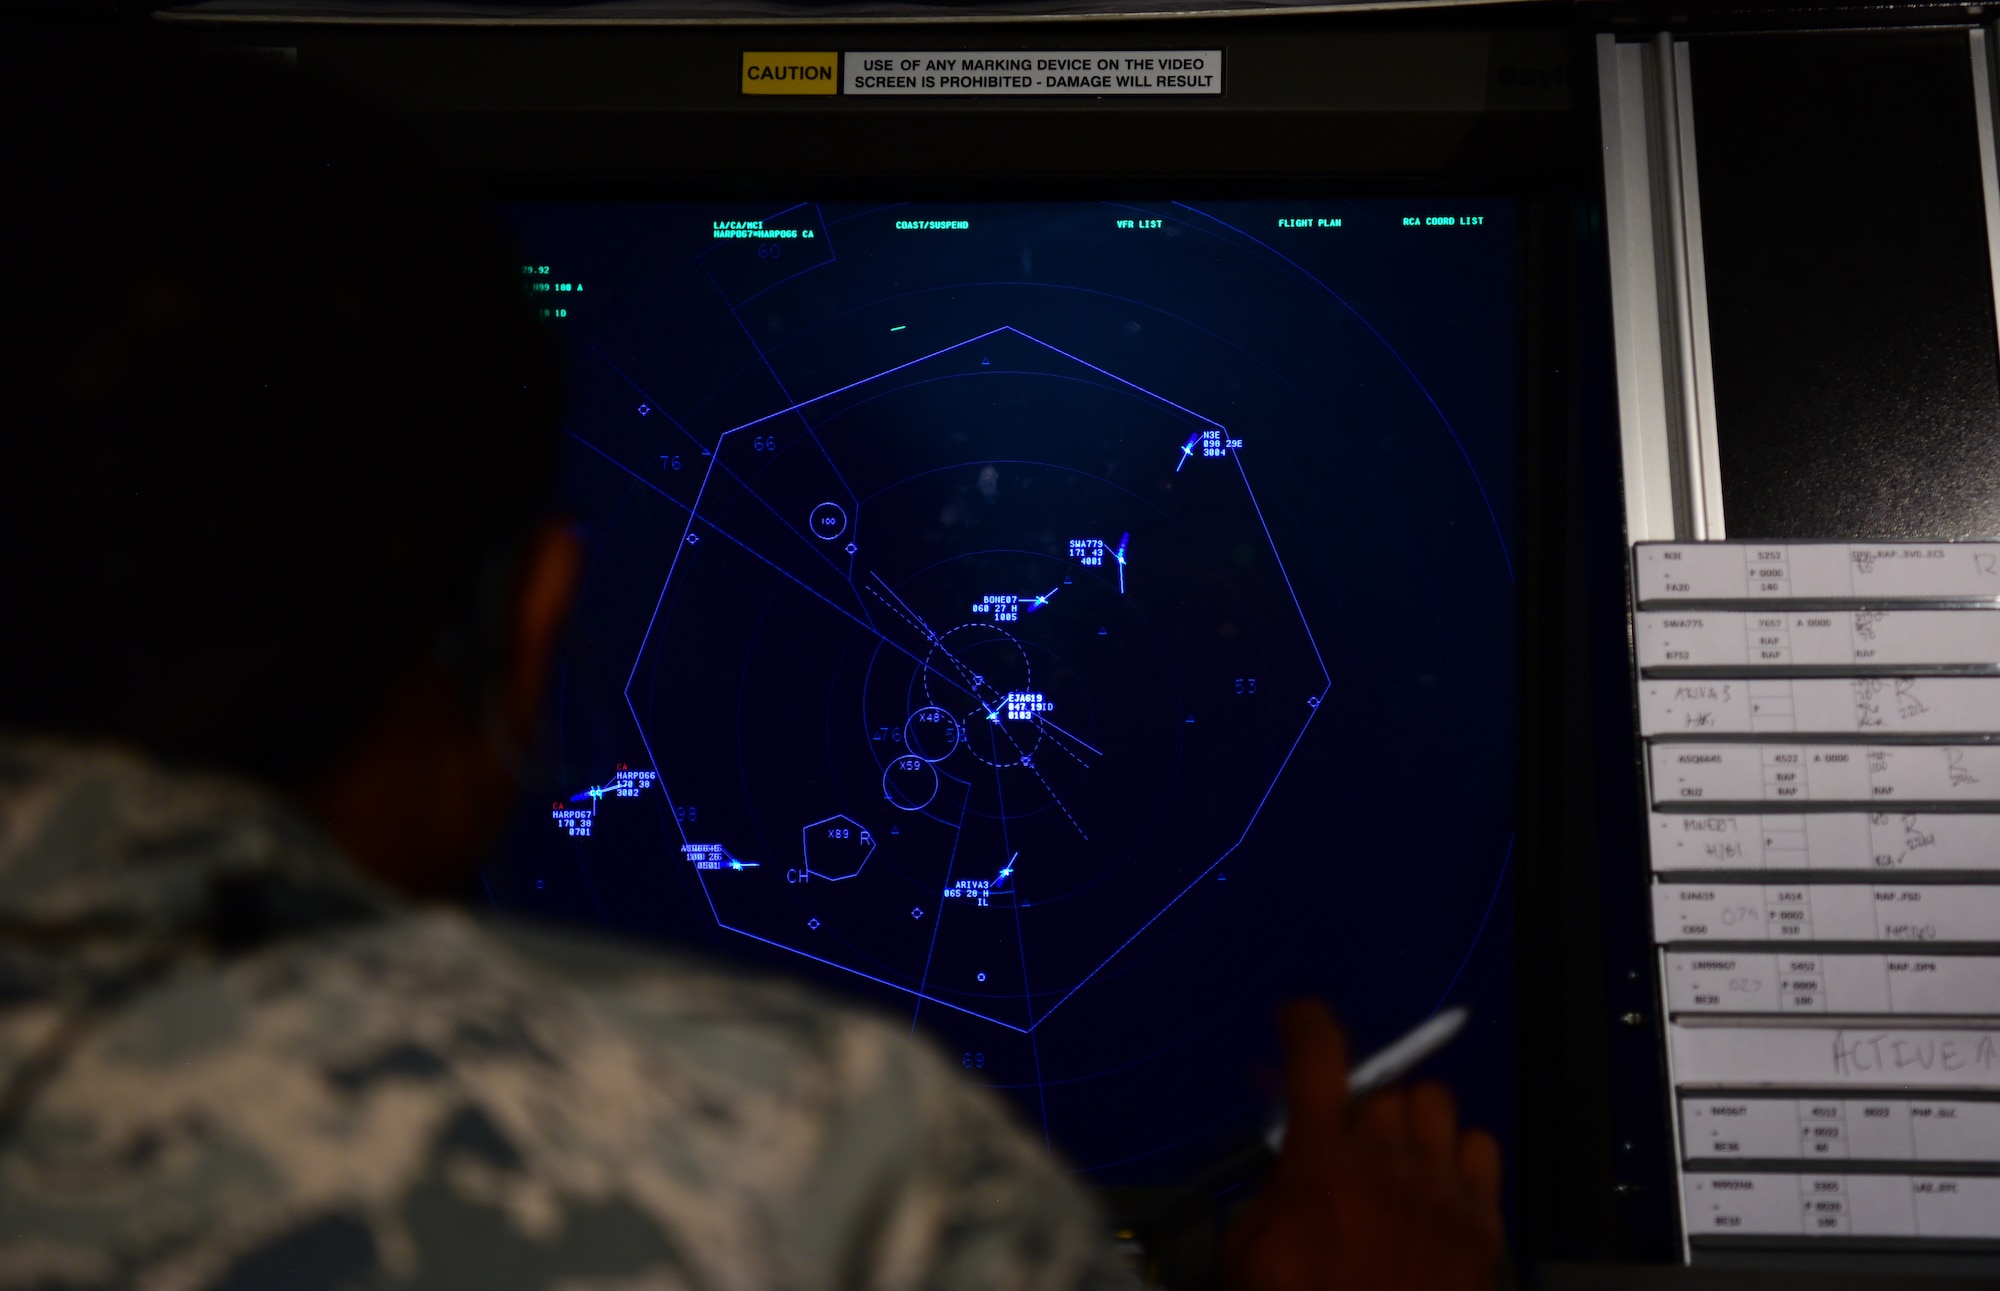 Staff Sgt. Anthony Morgan, the 28th Operations Support Squadron air traffic control standardization and evaluation noncommissioned officer in charge, coordinates flights at a radar approach control terminal at Ellsworth Air Force Base, S.D., July 10, 2018. Air traffic controllers at Ellsworth AFB are qualified on not only their own flight line, but also on the flight line at Minot AFB, North Dakota. (U.S. Air Force photo by Airman 1st Class Nicolas Z. Erwin)